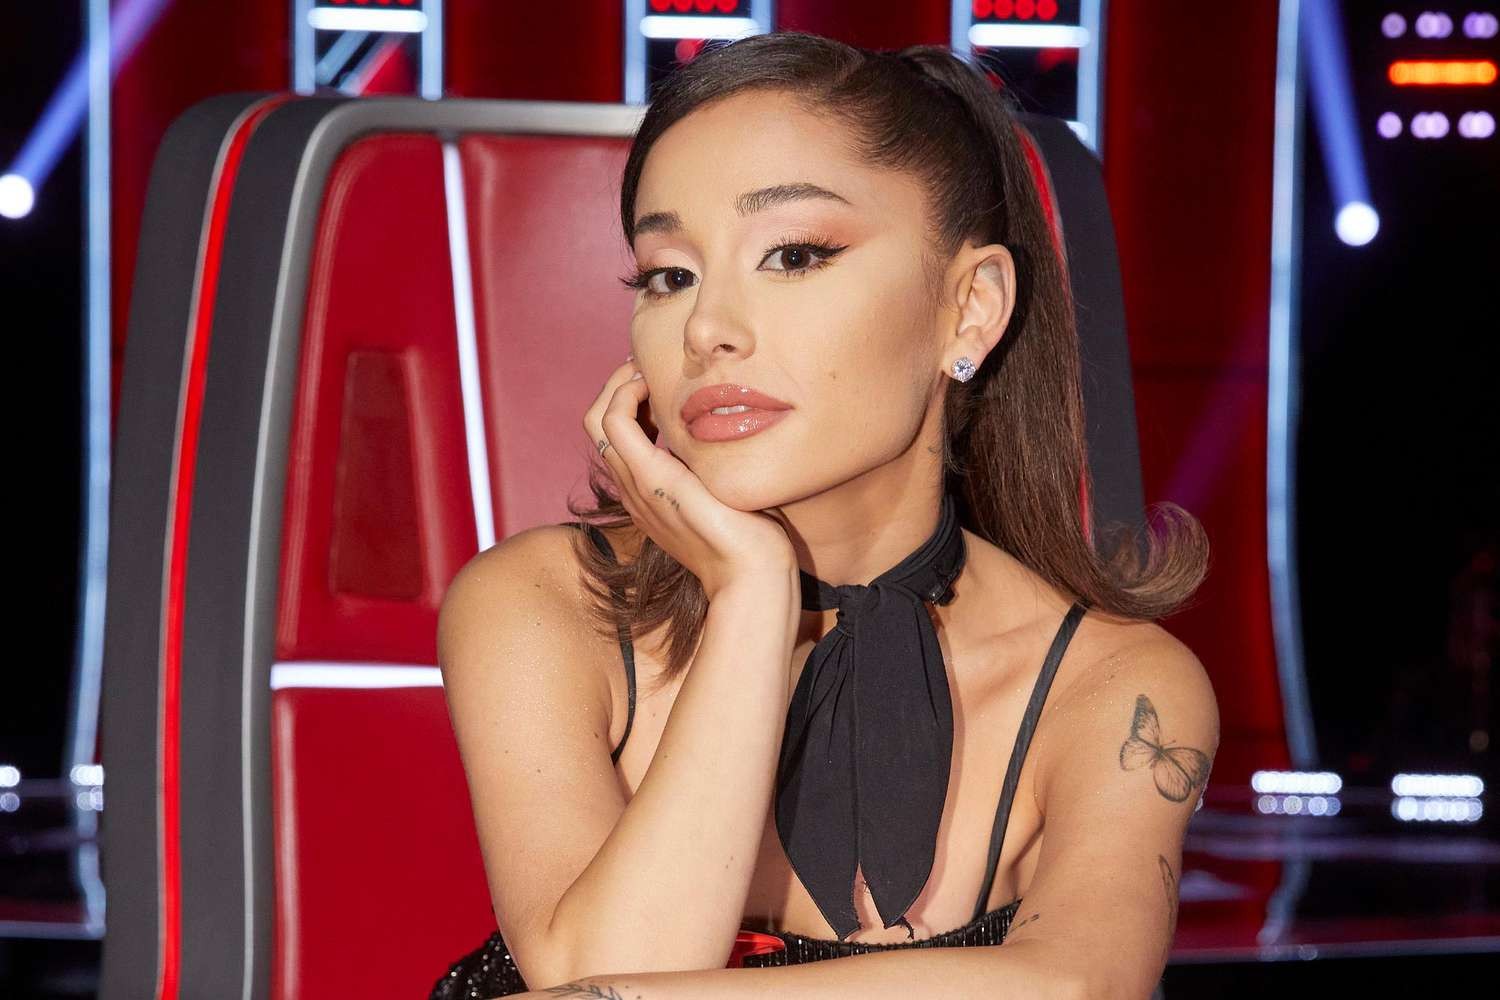 Ariana Grande was one of the judges on season 21 of The Voice!